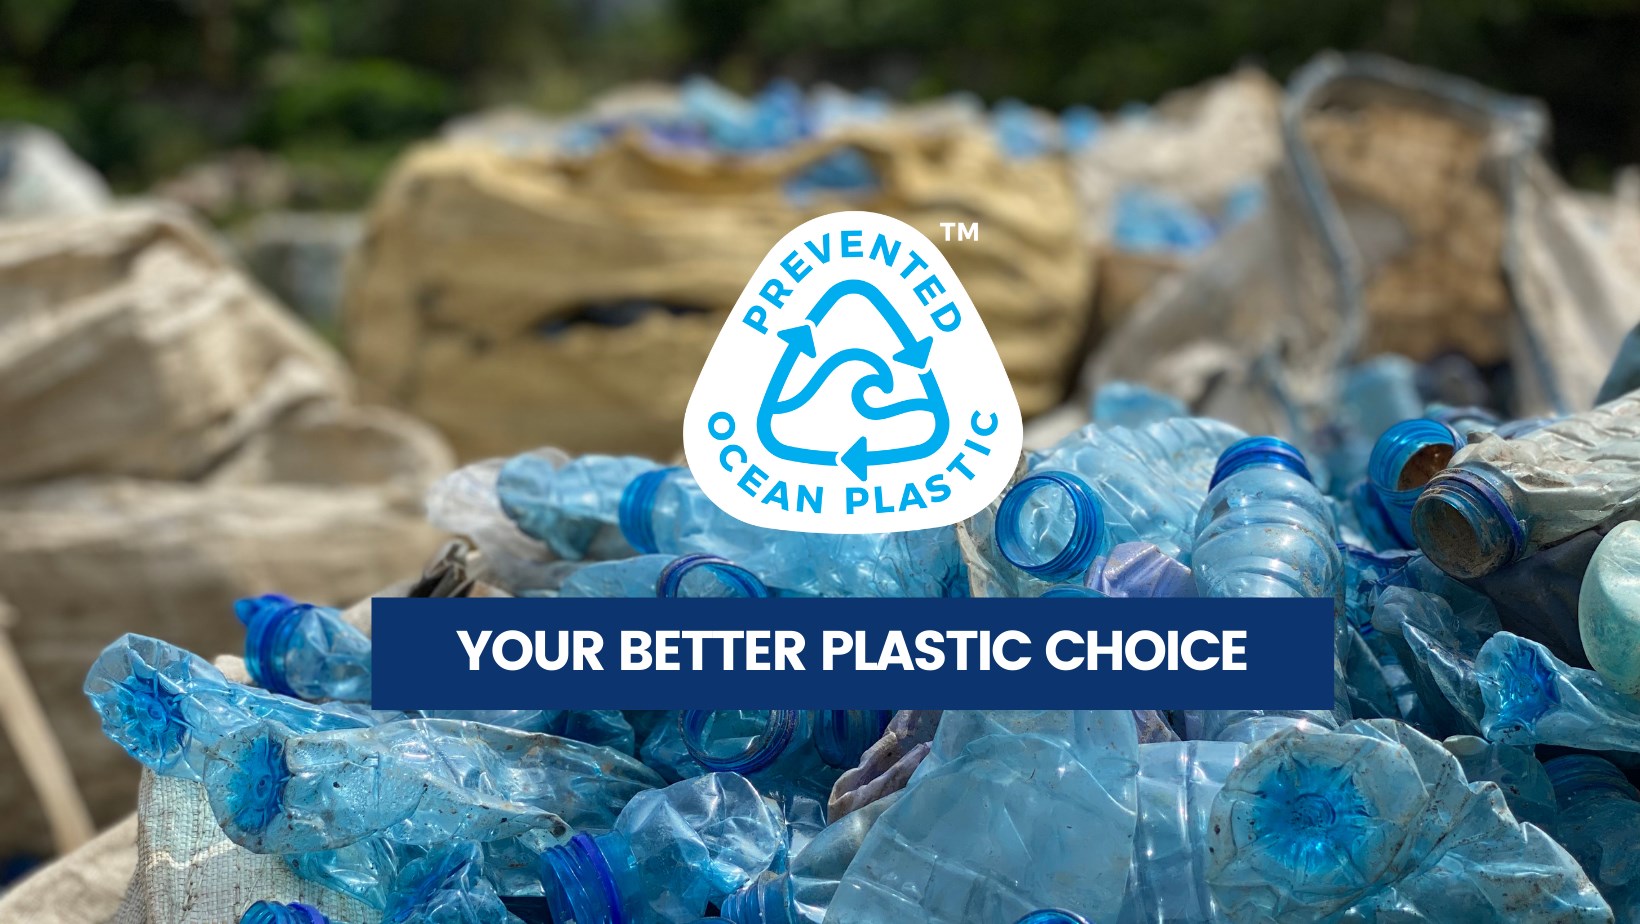 Prevented Ocean Plastic preventing plastic from entering the oceans and converting it into recycled plastic